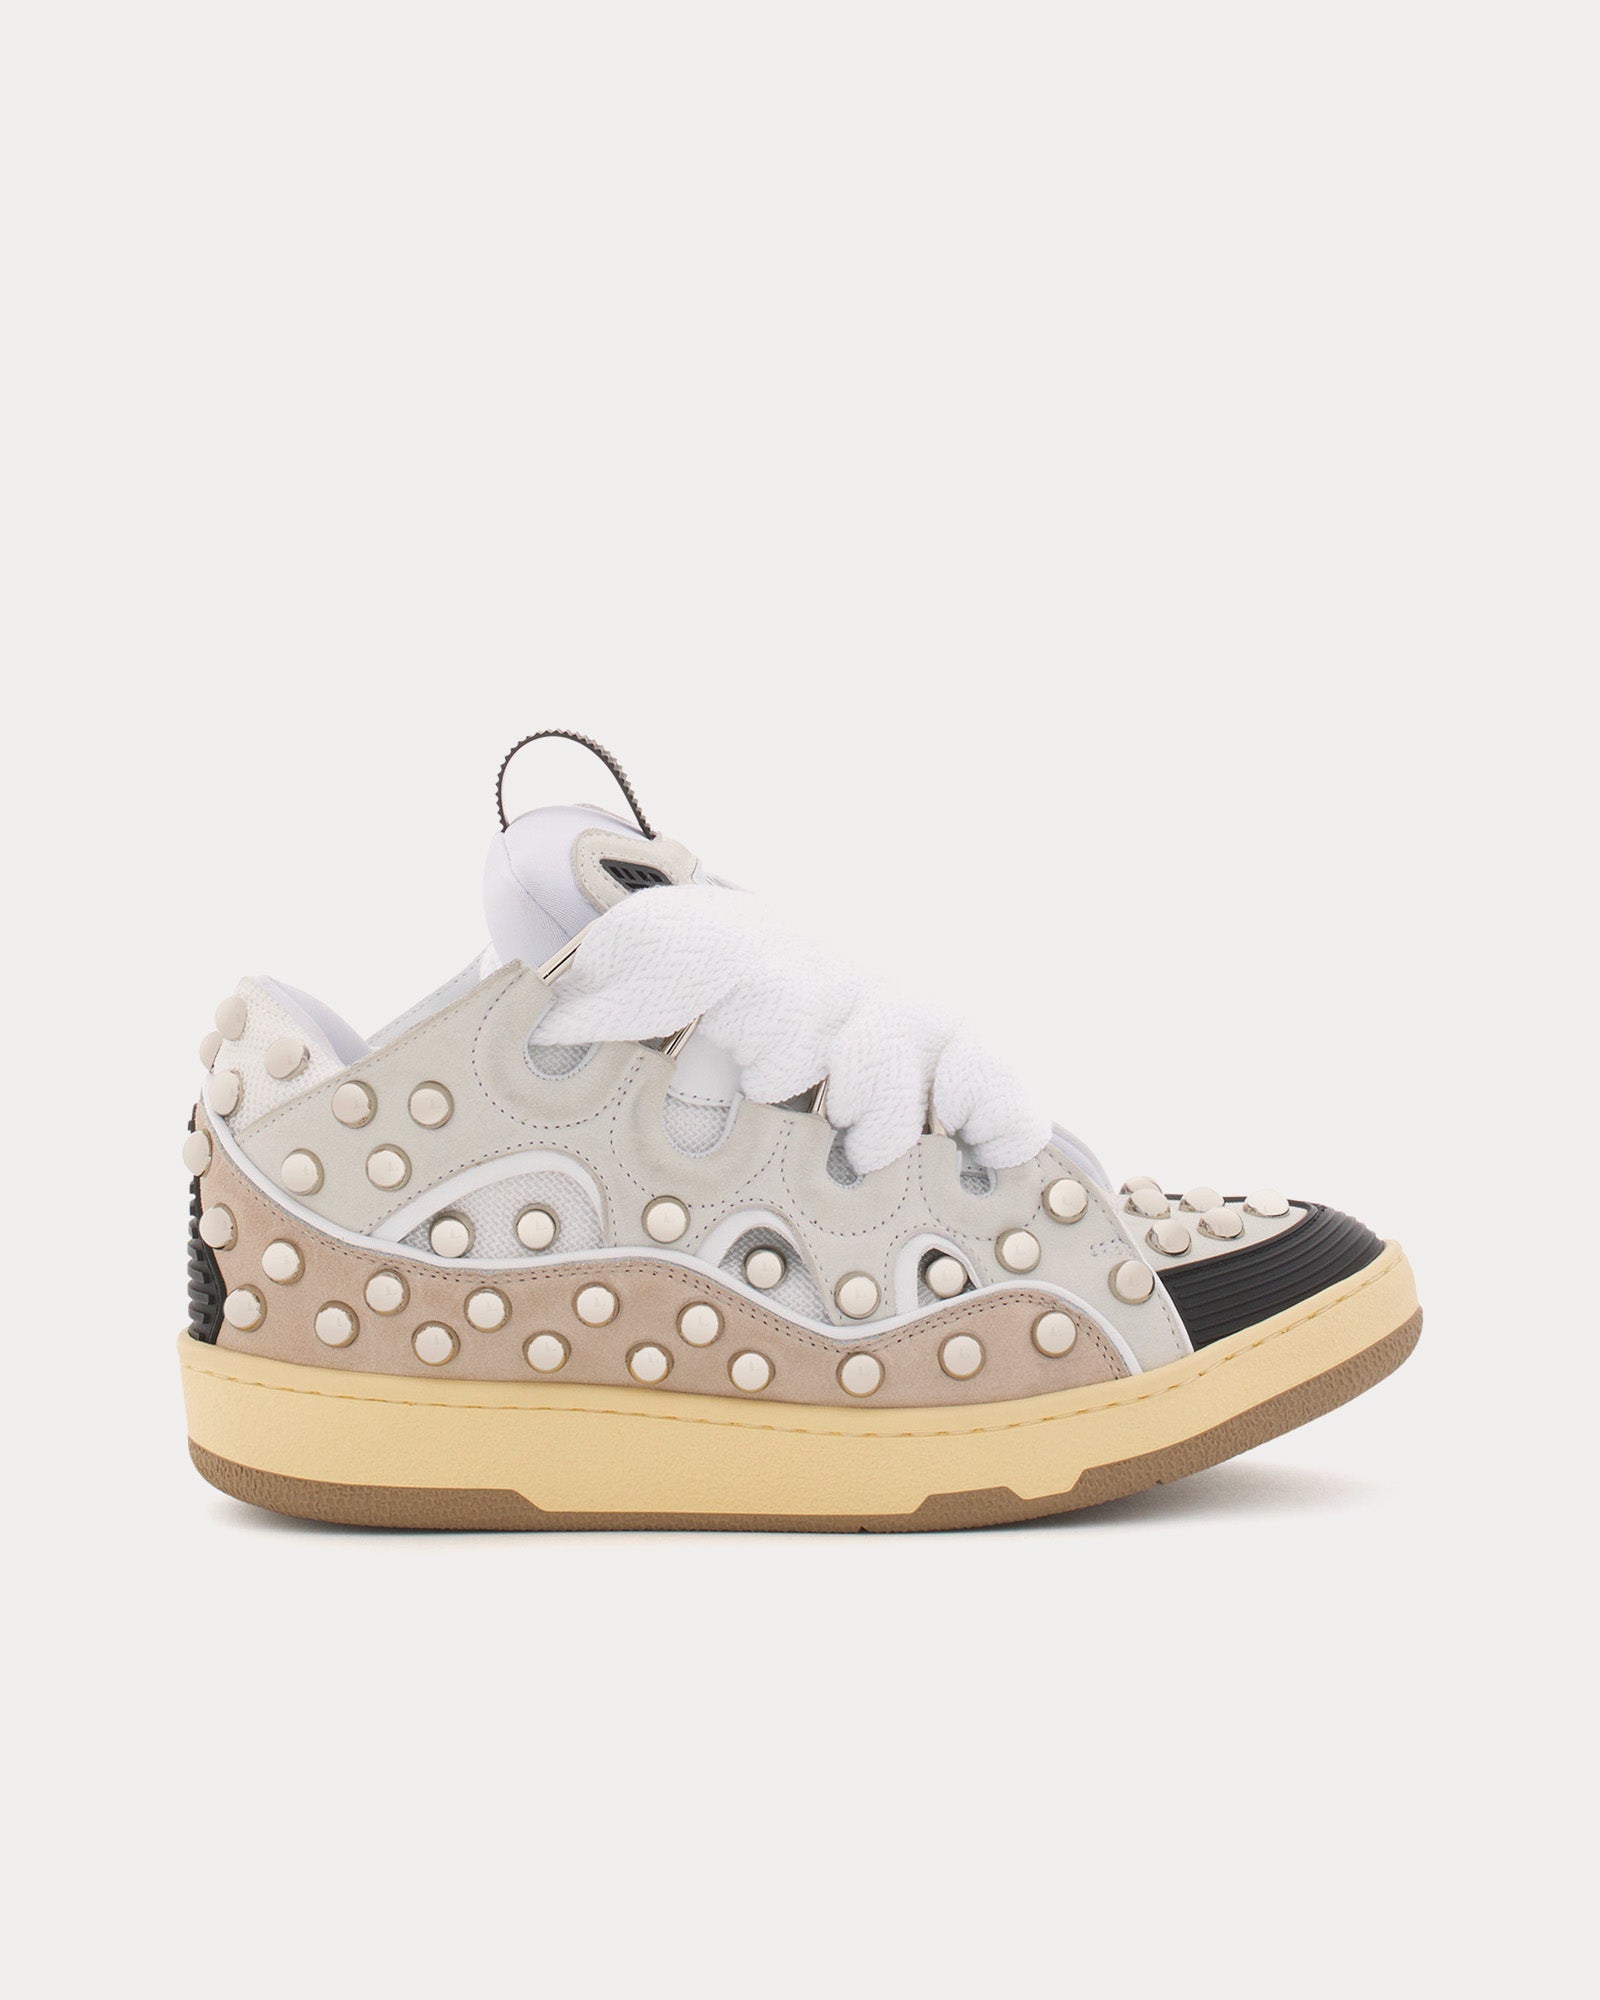 Lanvin - Curb Studded Leather White Low Top Sneakers